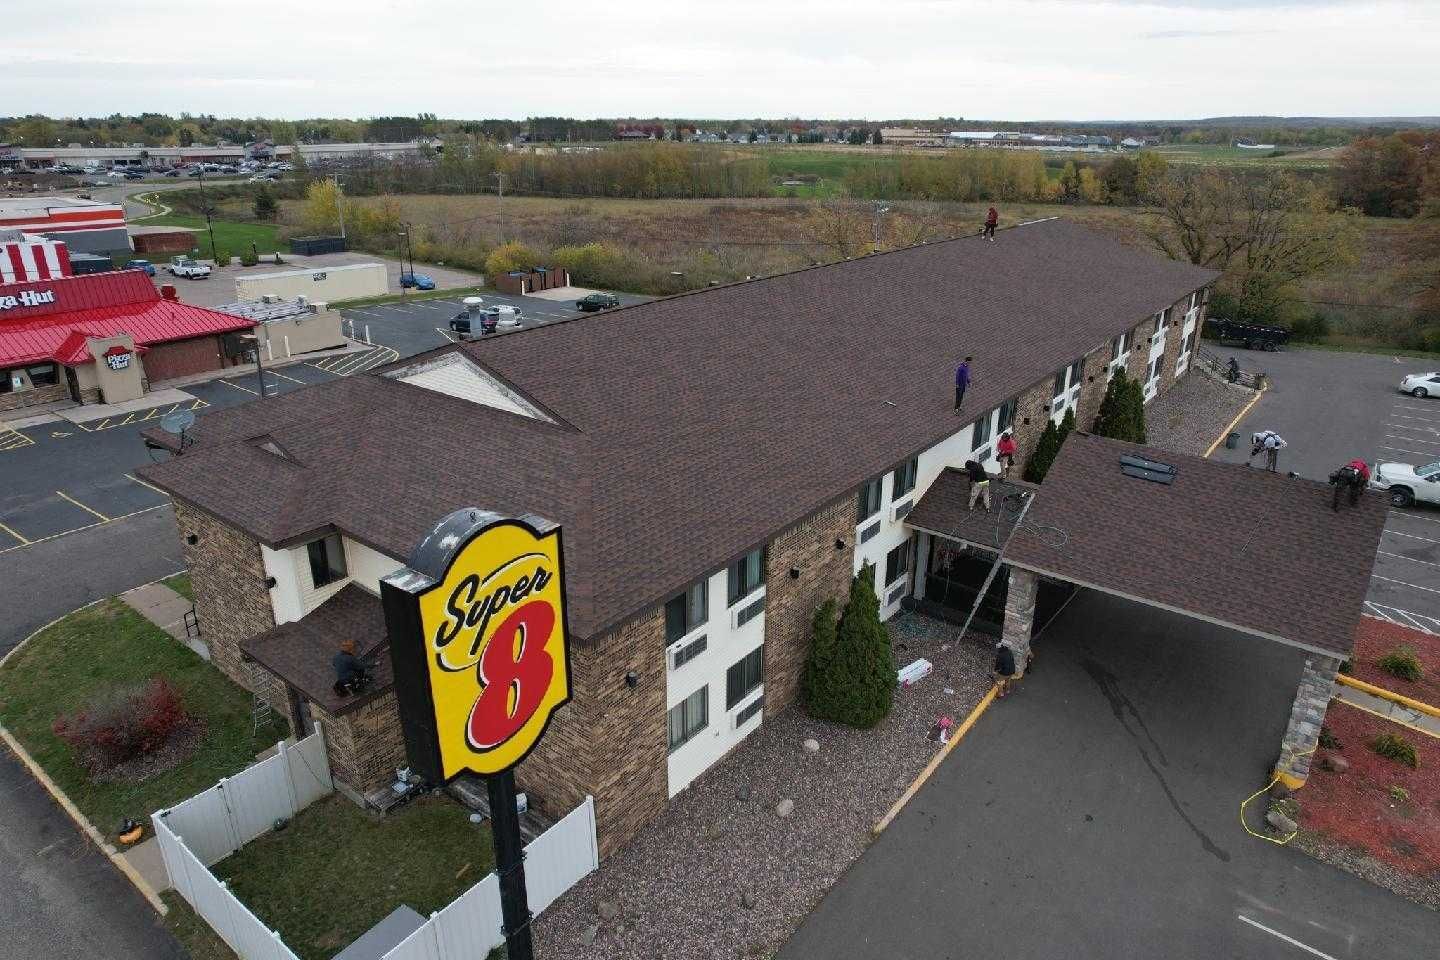 An aerial view of a super 8 hotel in a small town.